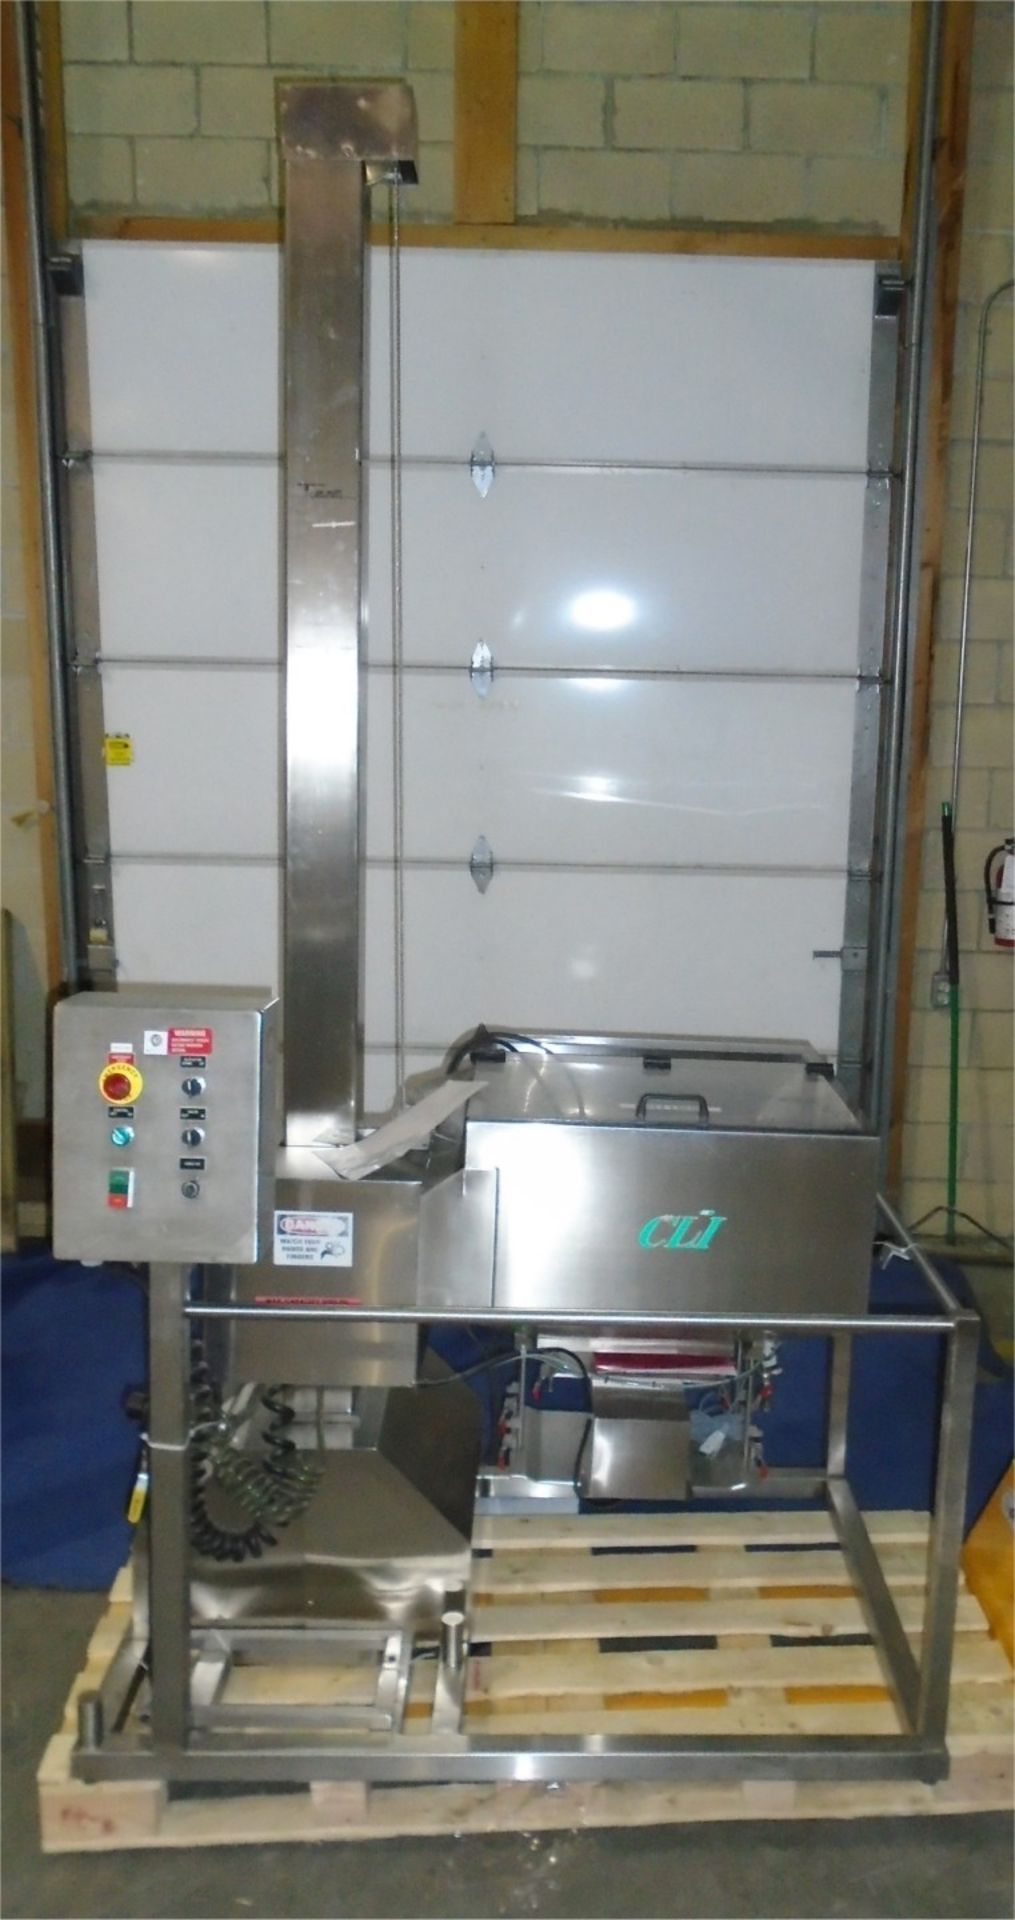 Used CLI tablet Elevator Feeder model TE4-S006. Serial #429981D. Features: max discharge height 78”,